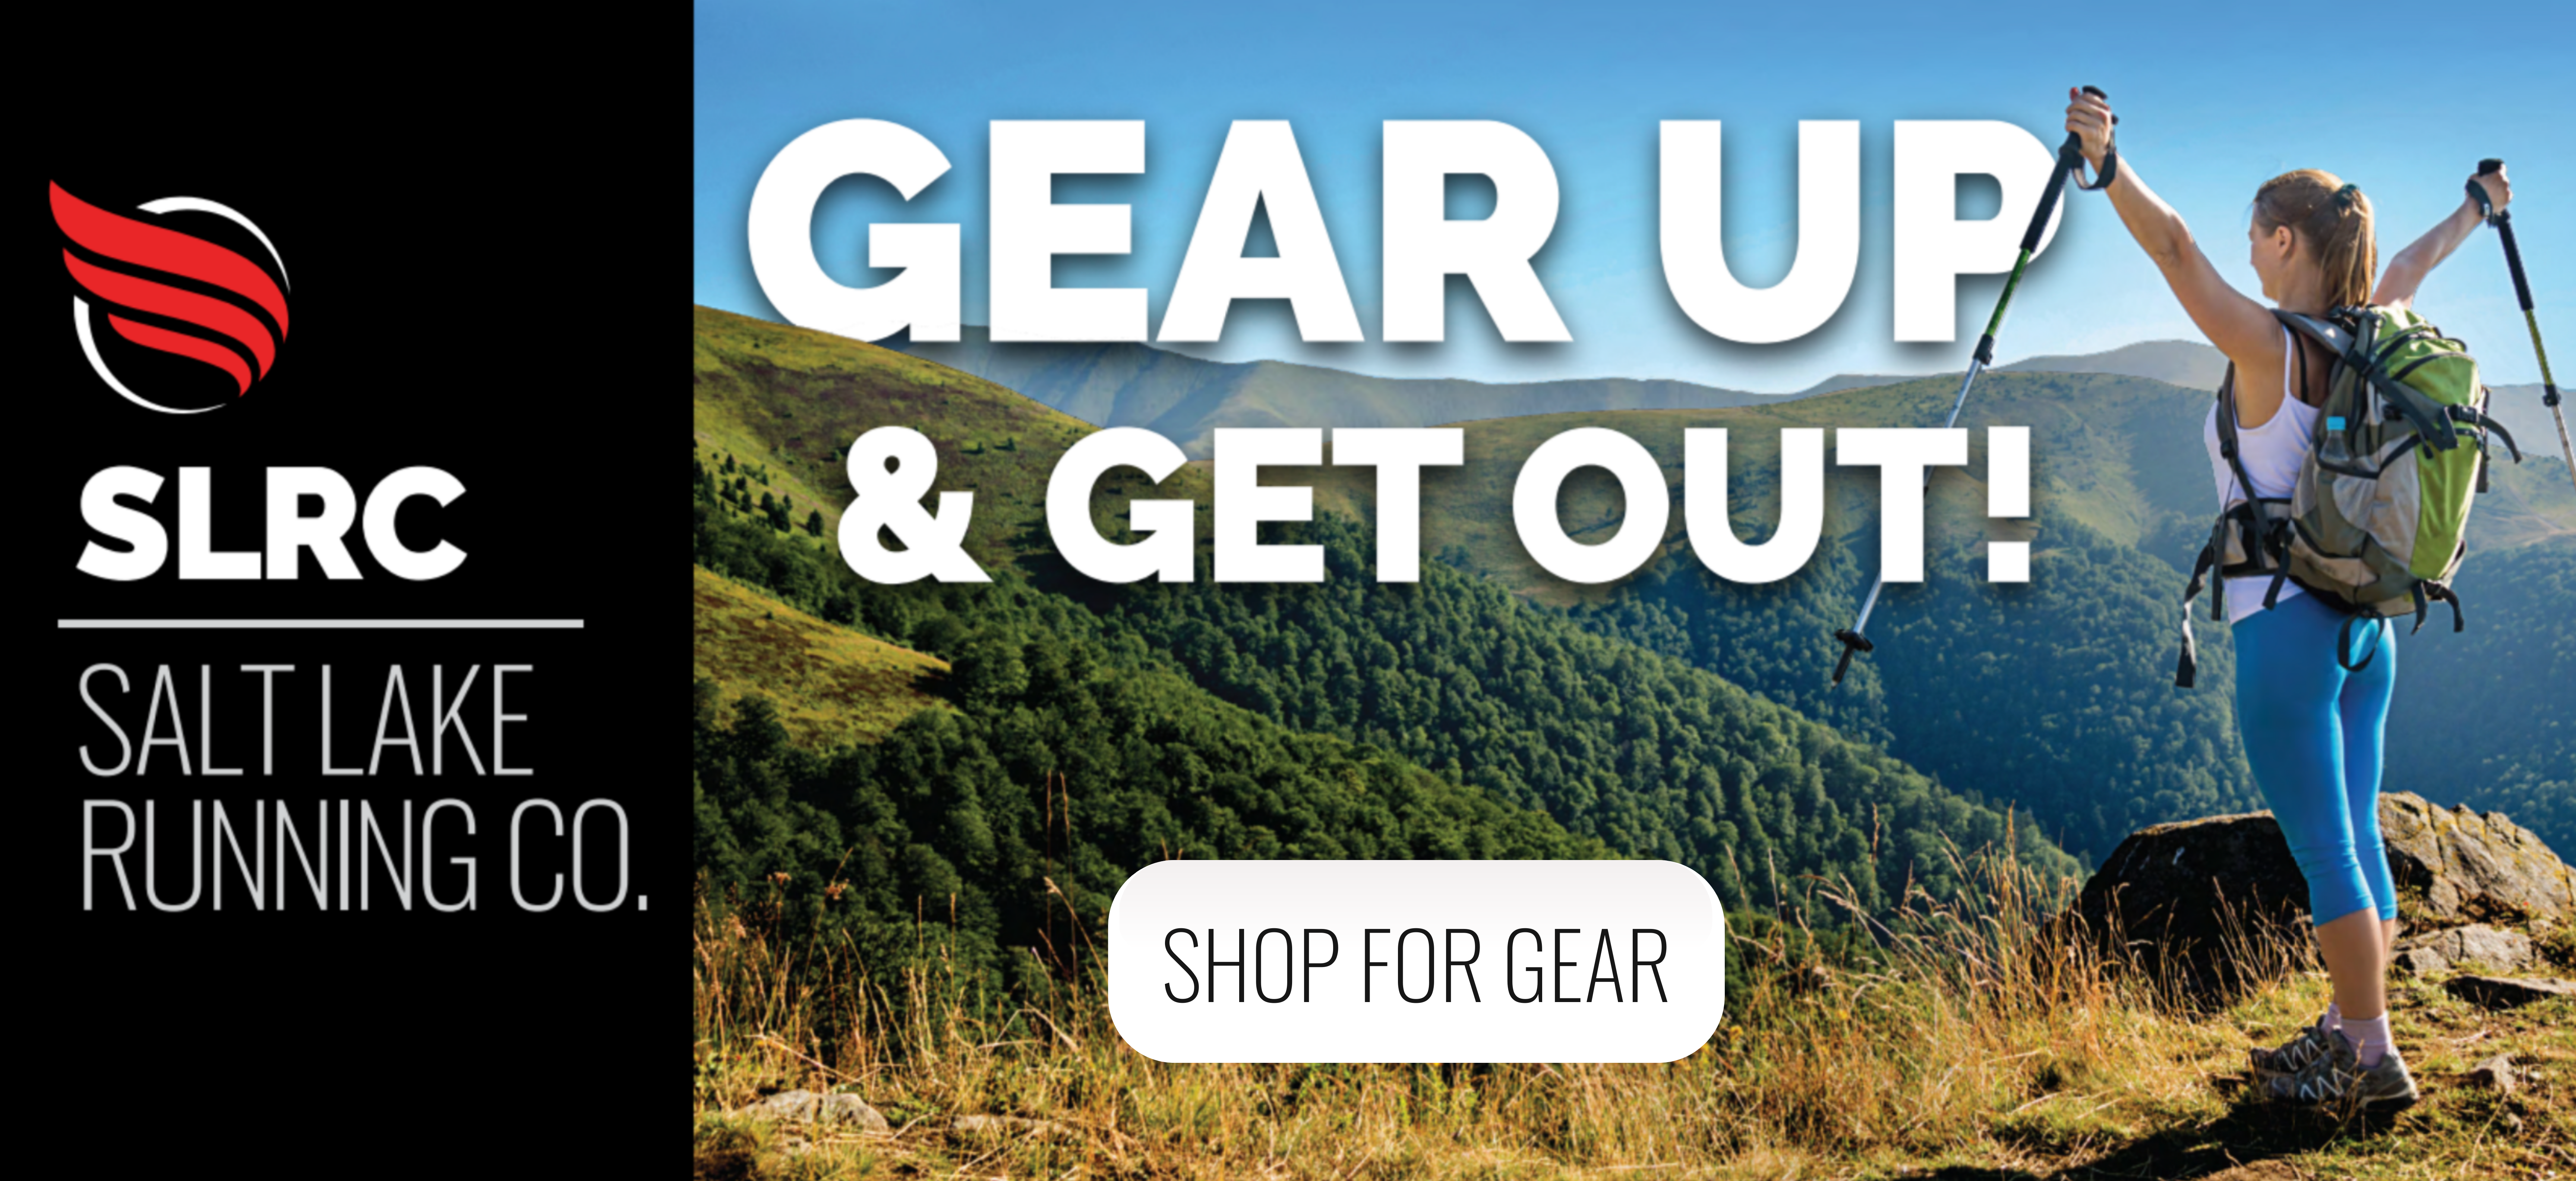 Gear Up & Get Out!